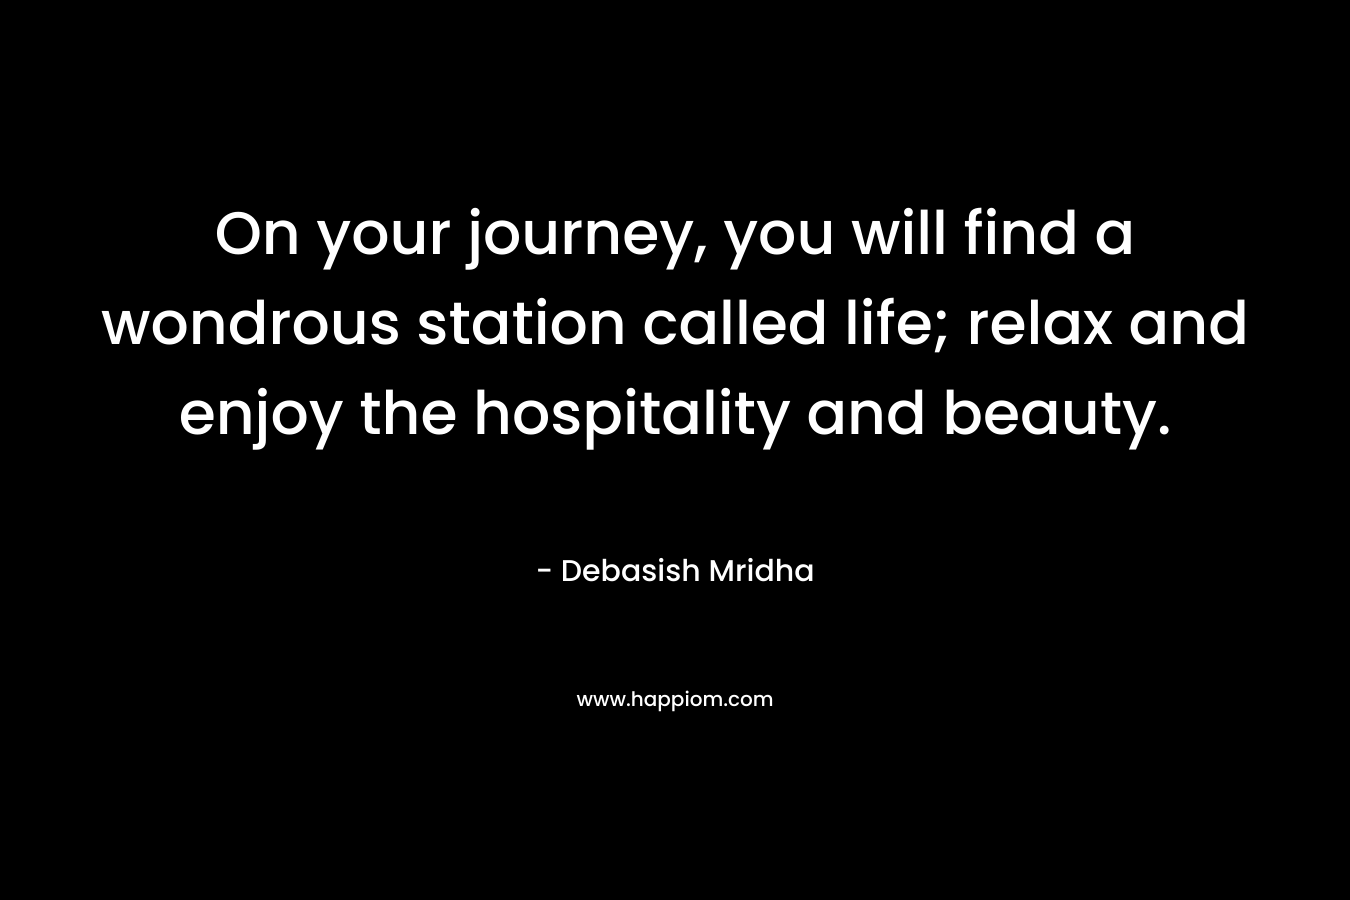 On your journey, you will find a wondrous station called life; relax and enjoy the hospitality and beauty.